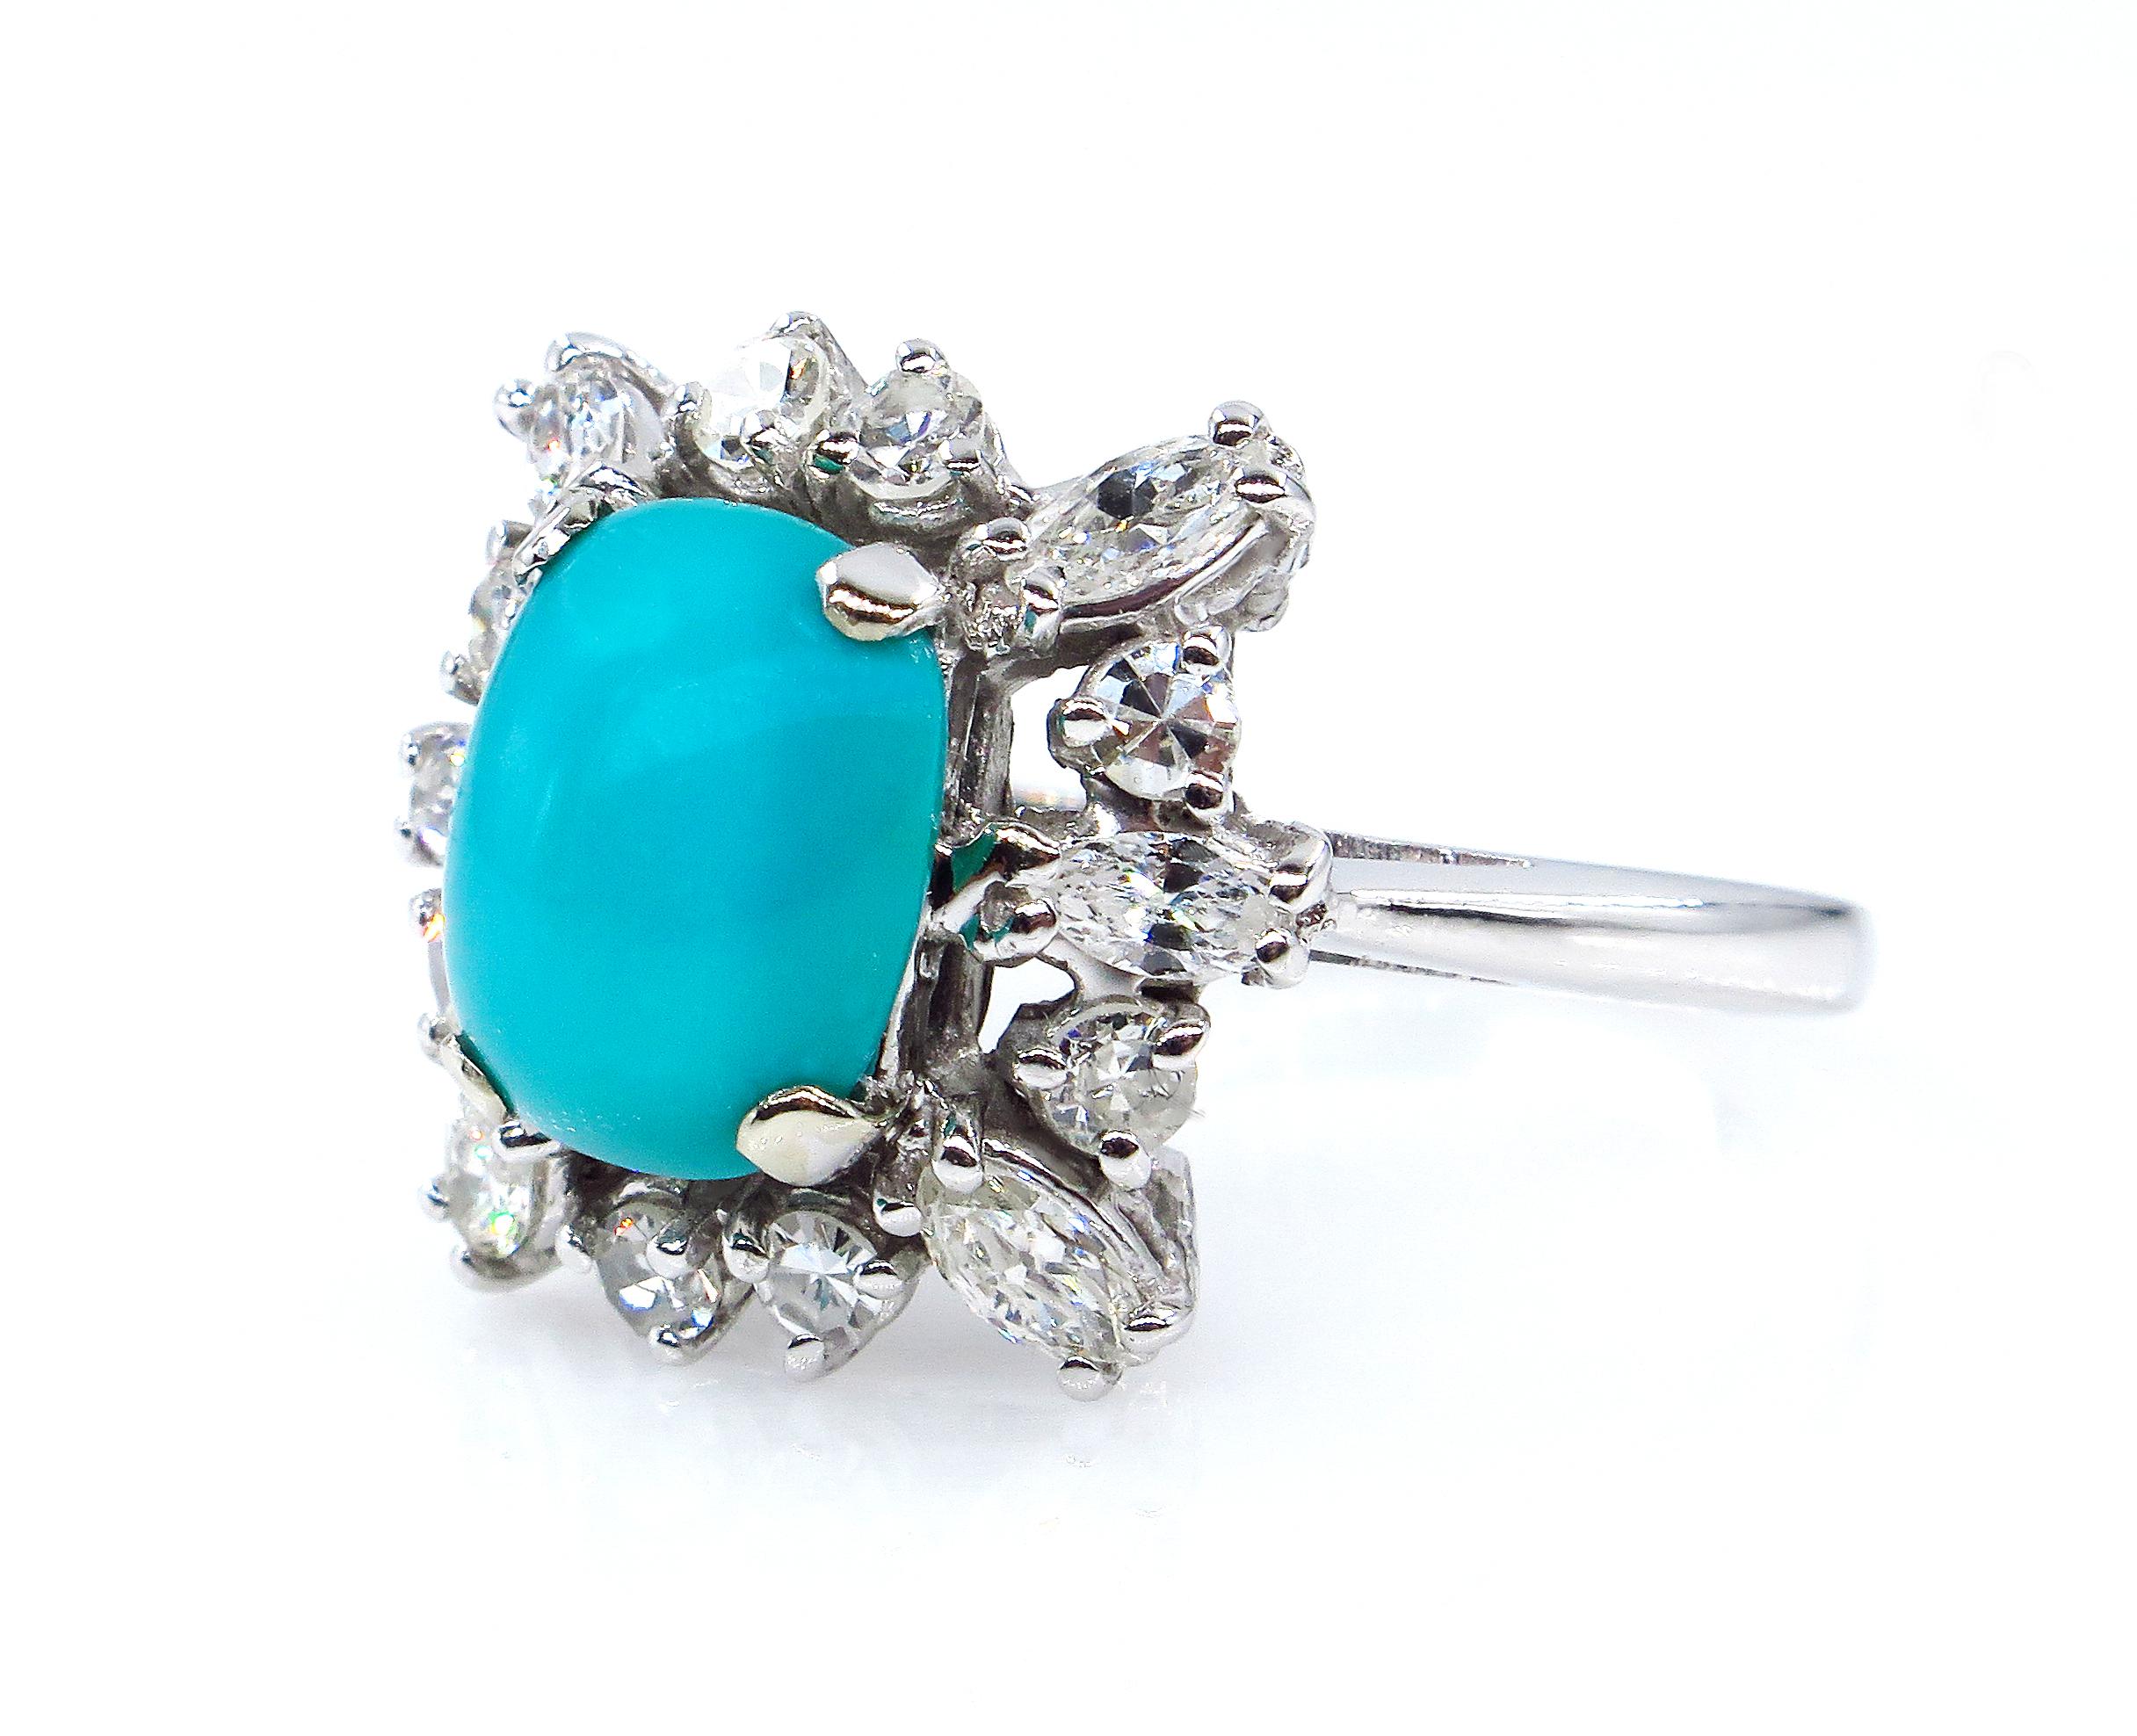 Make a sparkling statement with this Mid-20th Century Turquoise Diamond Platinum Cocktail Ring.
The multidimensional ring features a prong-set beautiful Blue Oval-Cushion shape Turquoise weighing shy 2.0ct (1.92ct) and measure 9.63x7.74x3.34mm. It